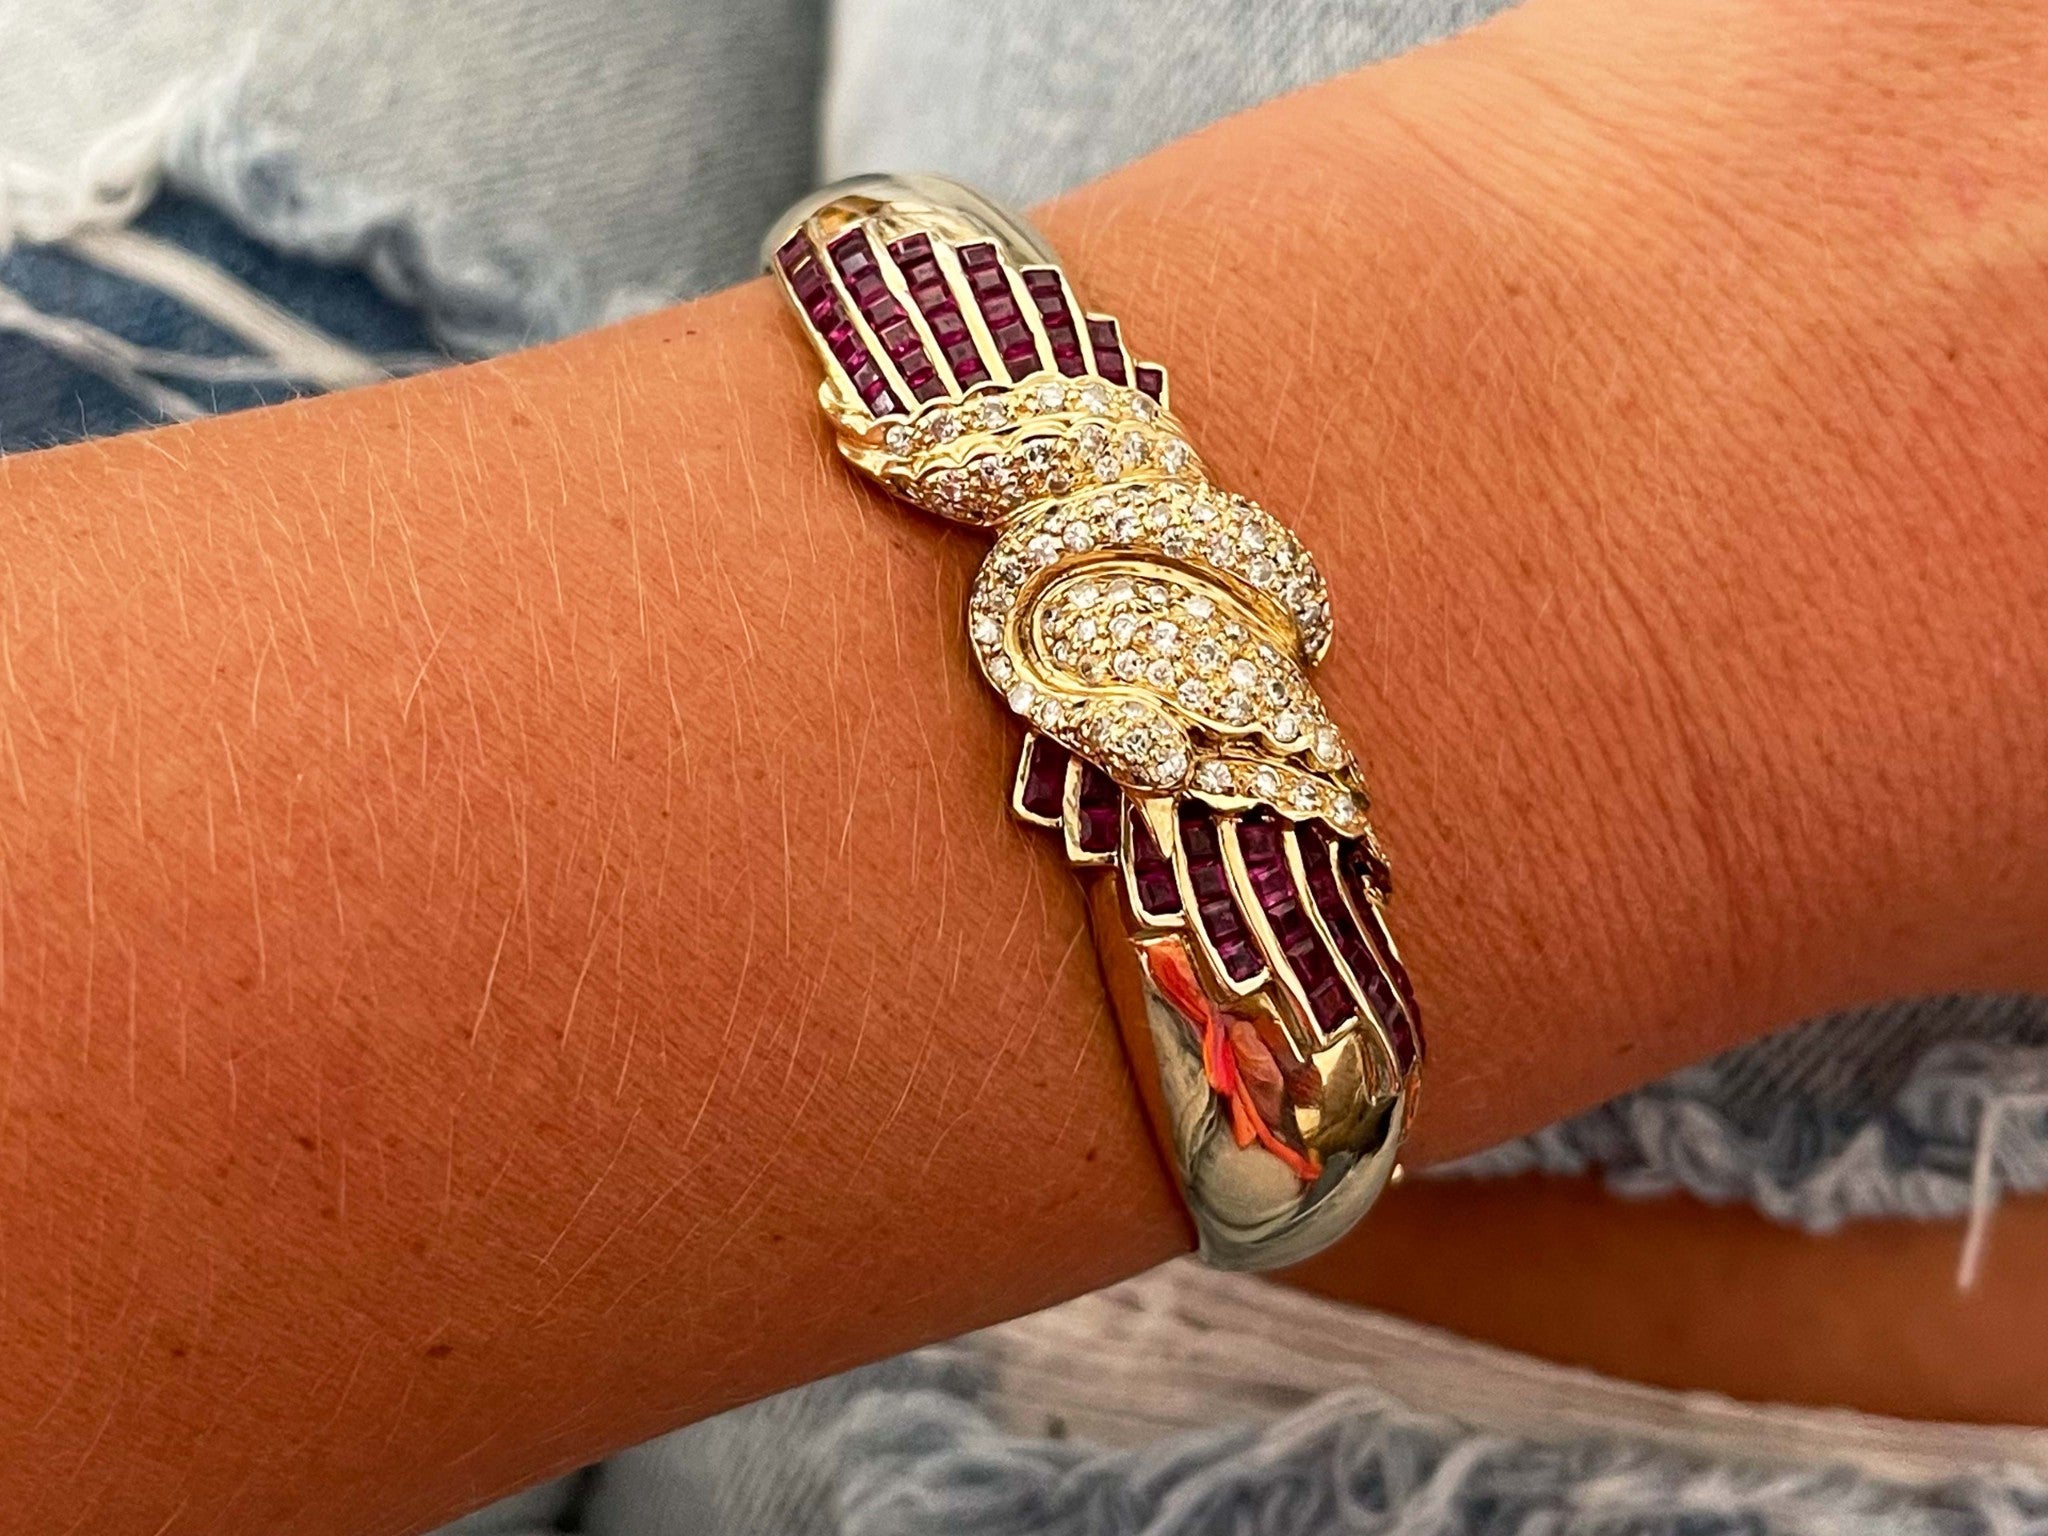 Diamond Swan and Ruby Bangle in 14k Yellow Gold